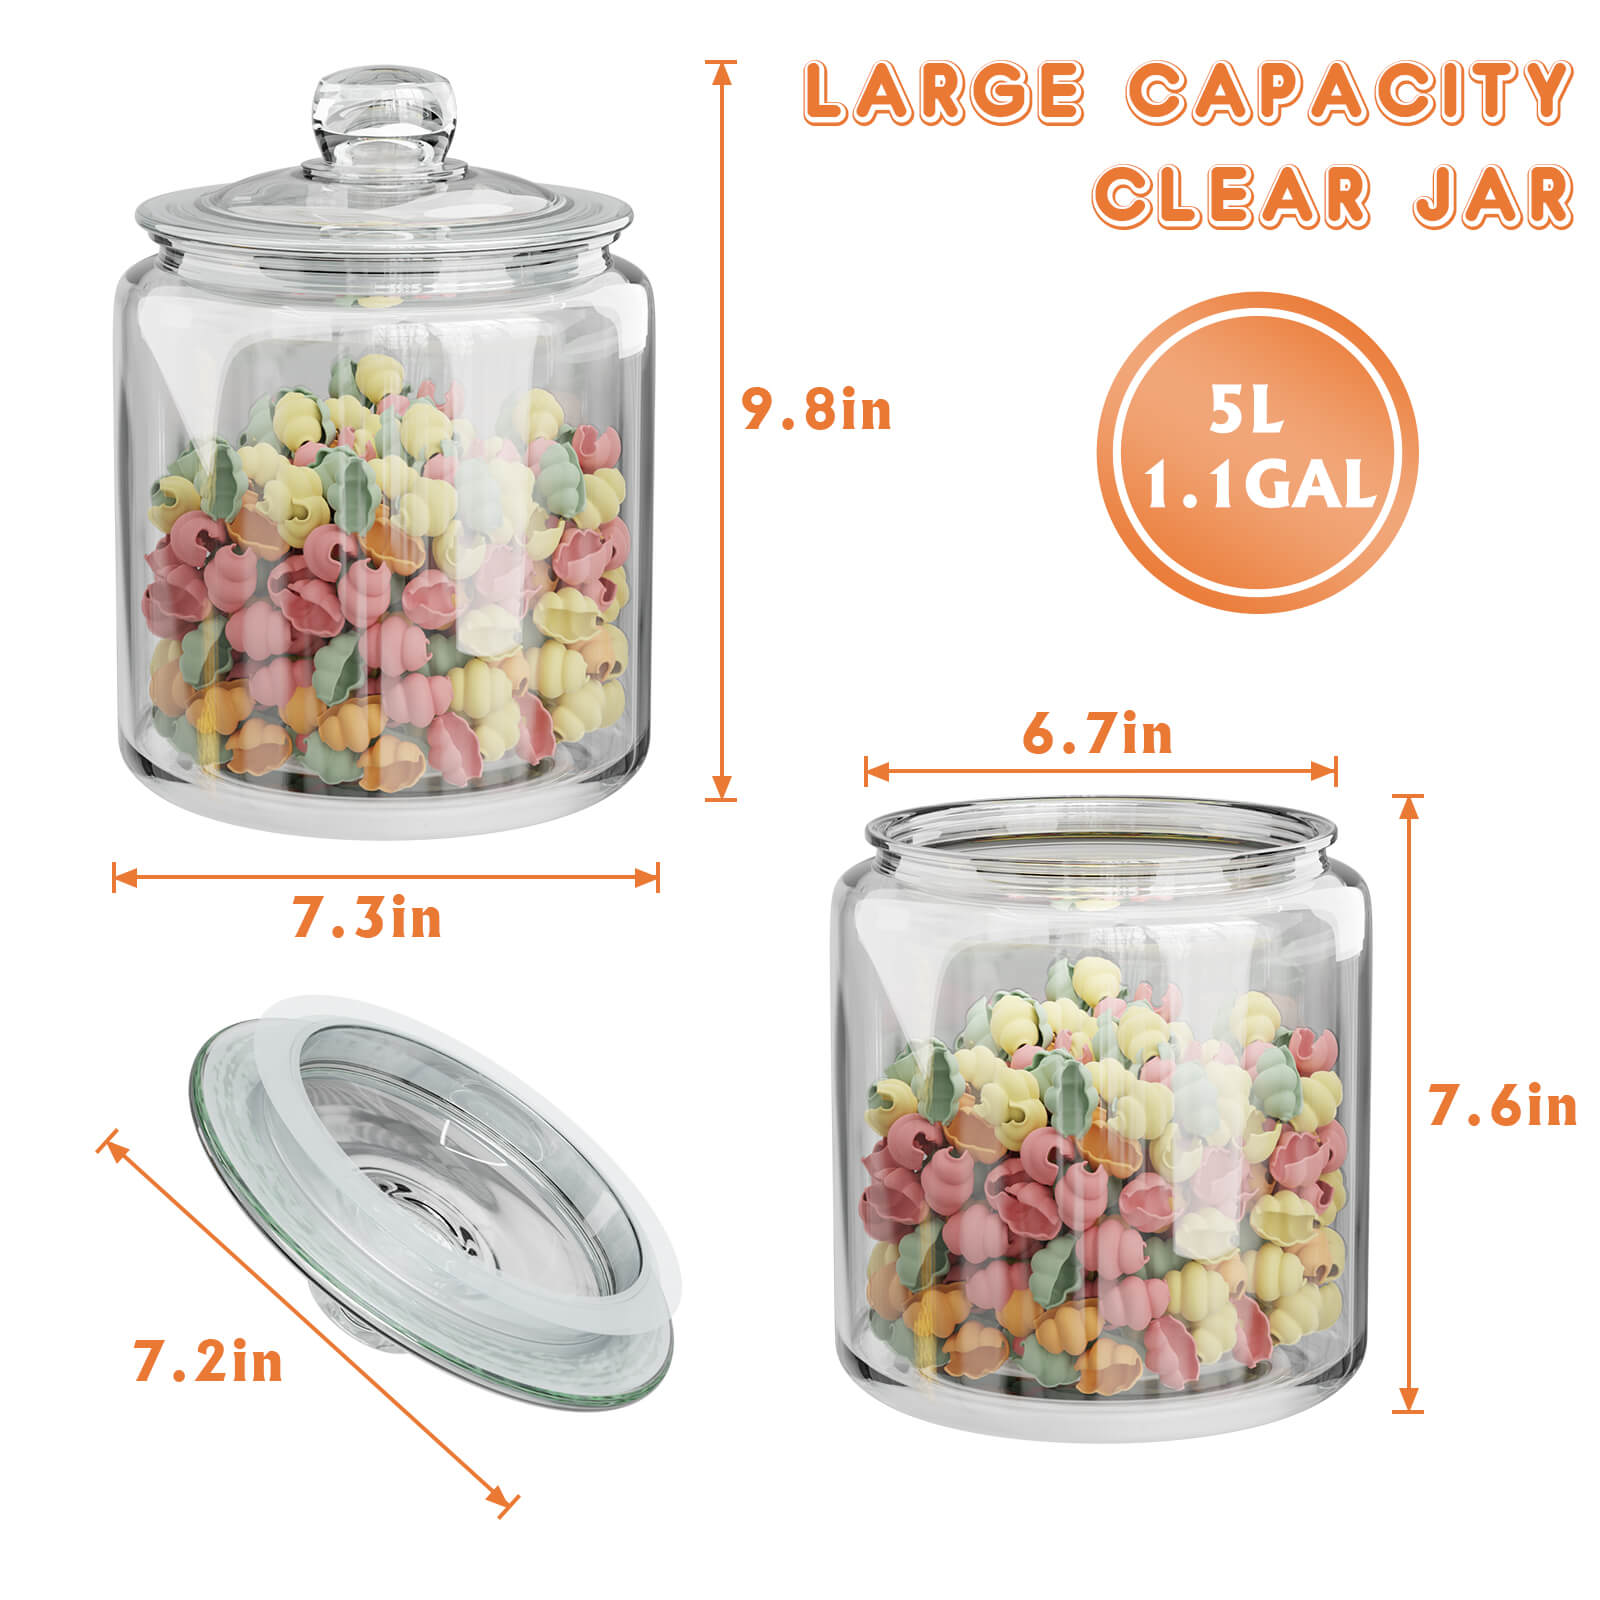 Super Wide Mouth Glass Storage Jar with Airtight Lids, 1 Gallon